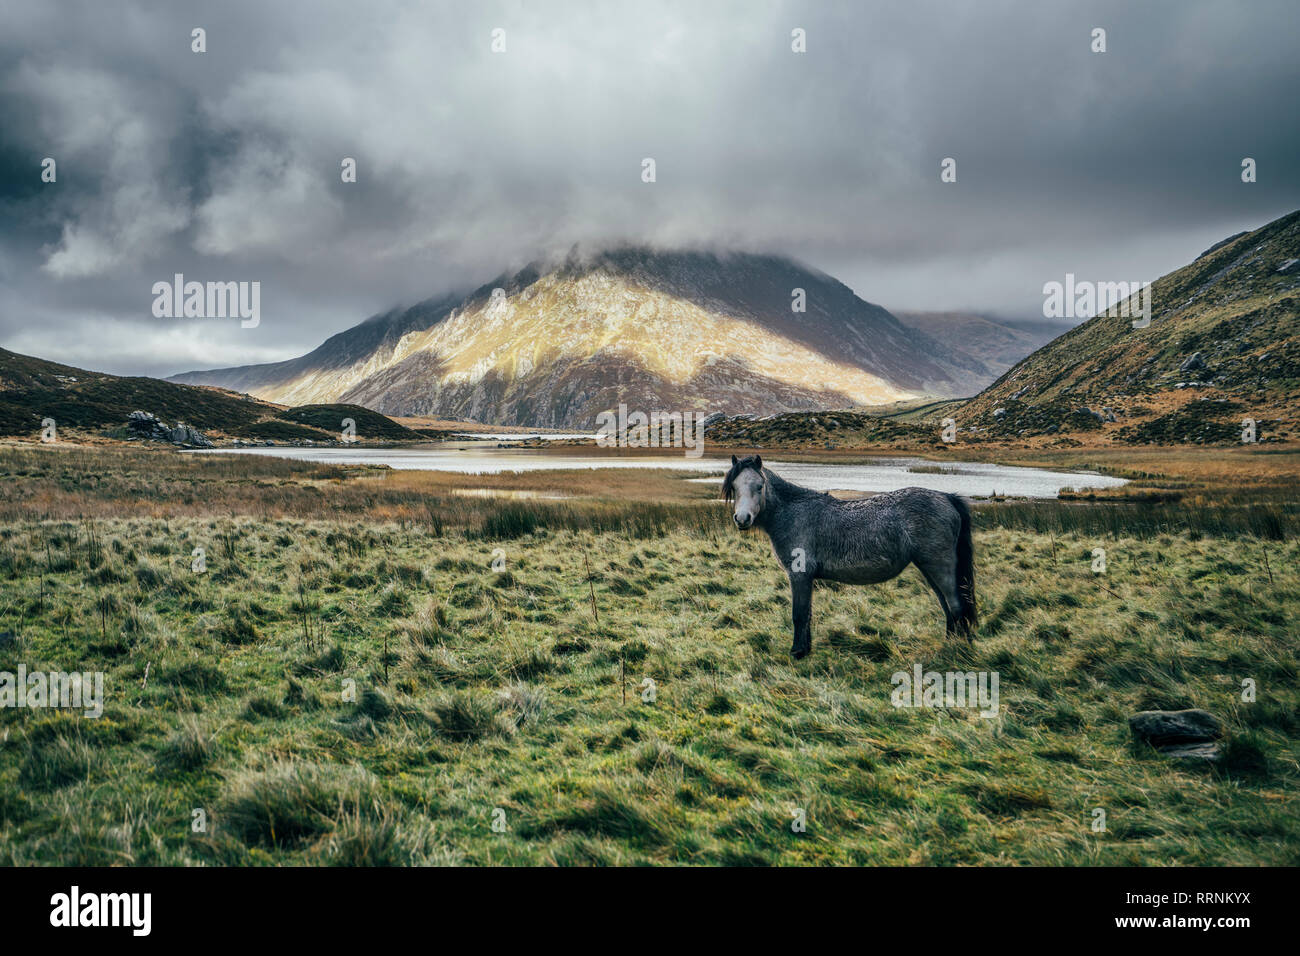 Wild horse in tranquil, remote landscape, Snowdonia NP, UK Stock Photo